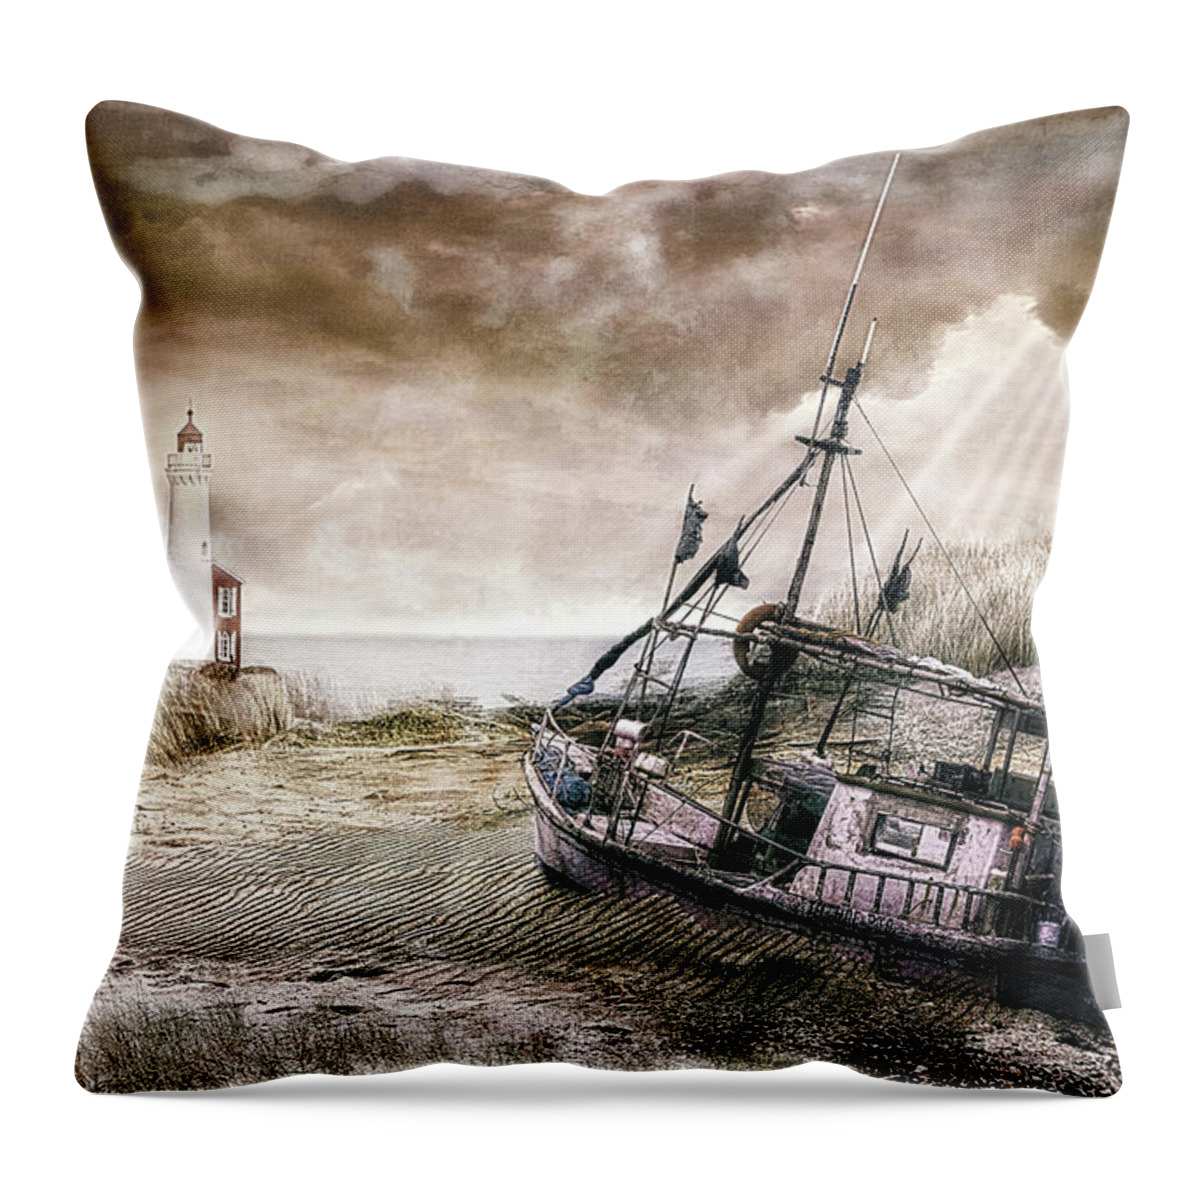 Landscape Throw Pillow featuring the digital art Derelict Boat by Merrilee Soberg